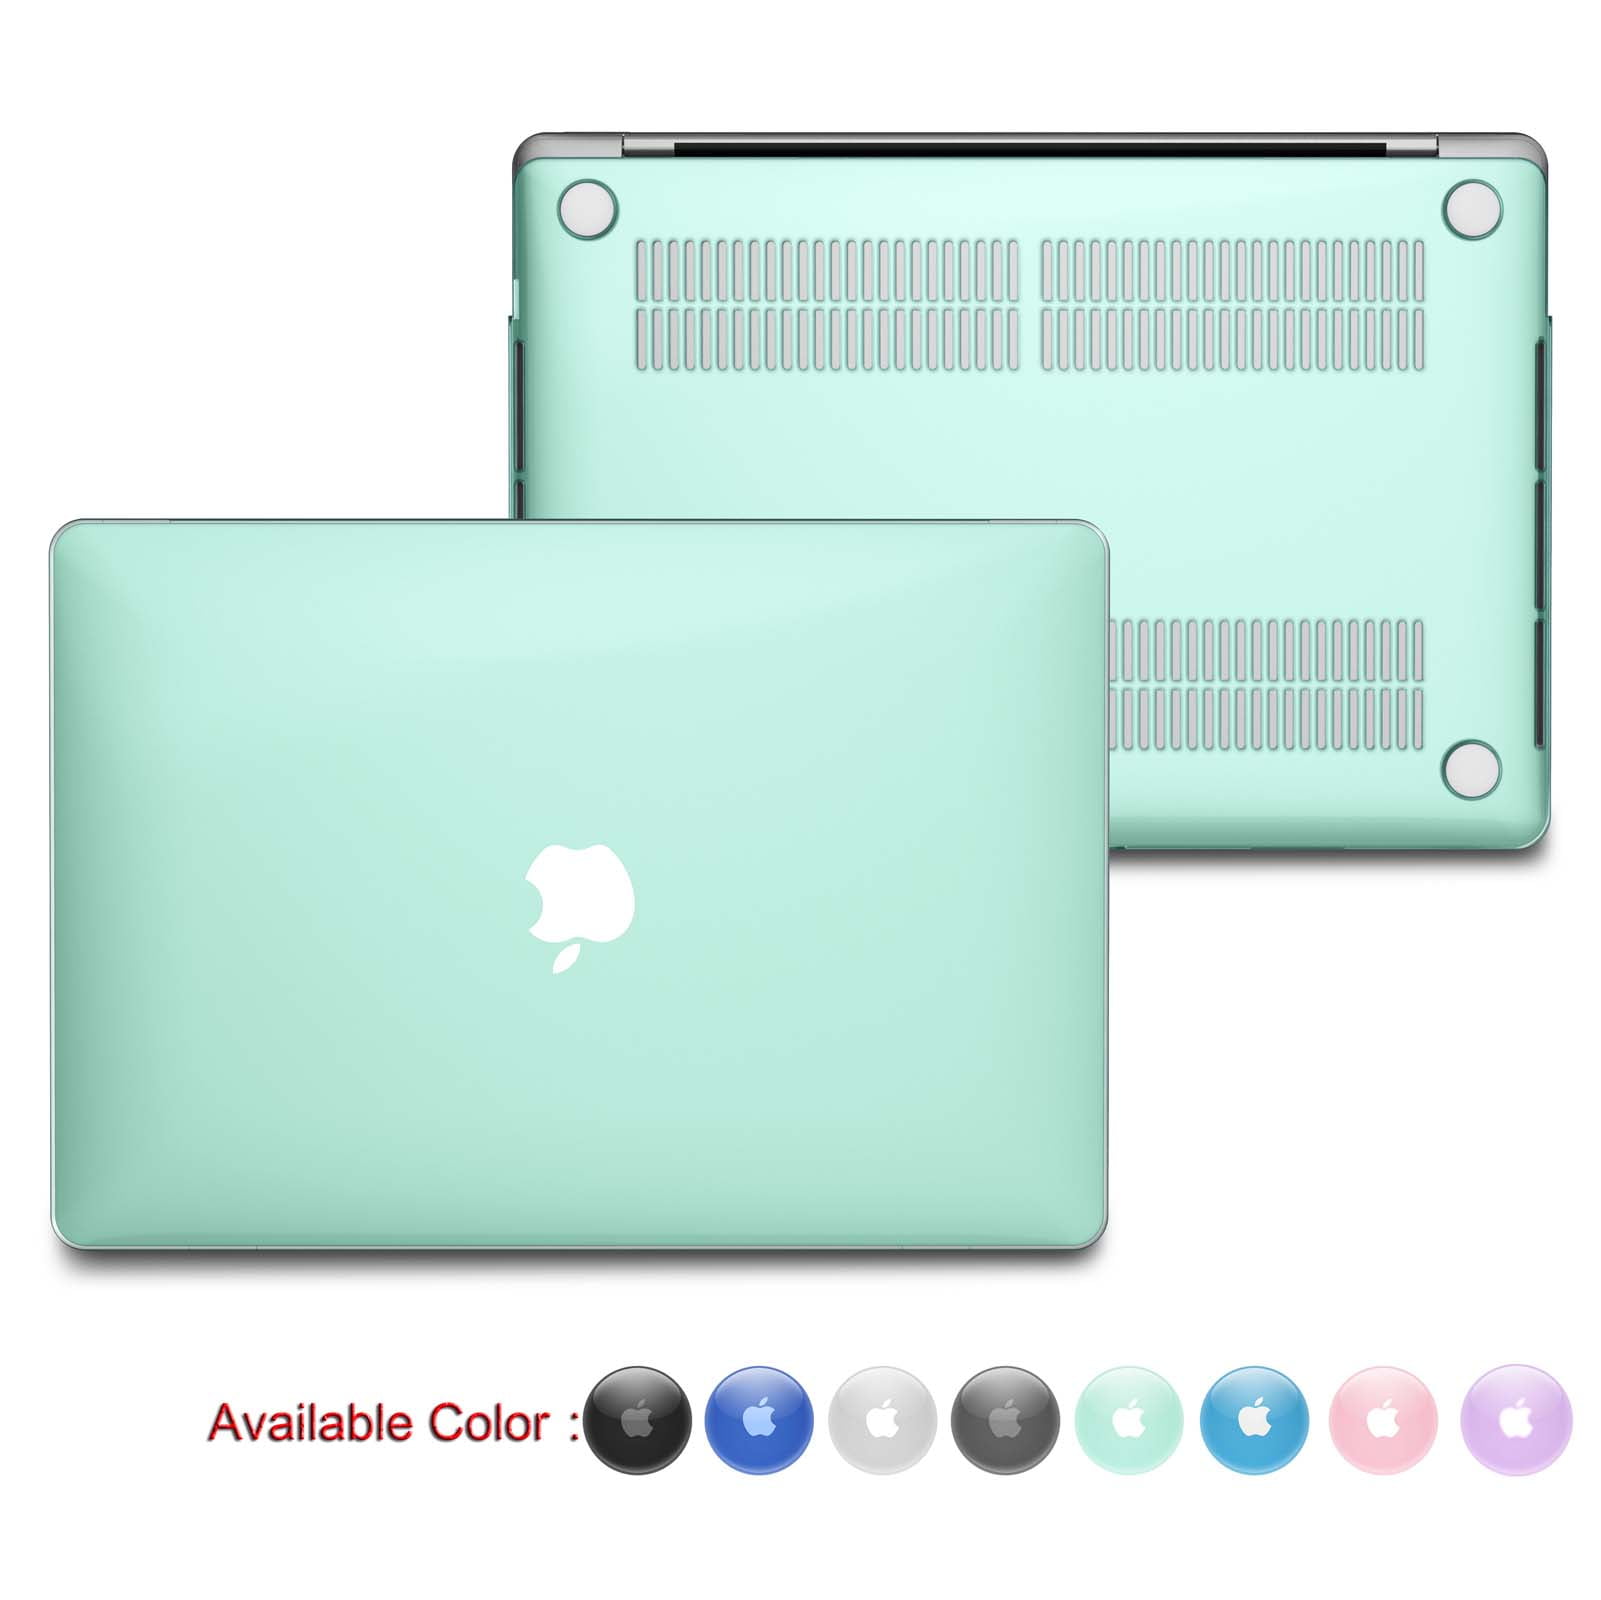 AQUA BLUE Crystal Hard Case for NEW Macbook Pro 15" A1398 with Retina display 